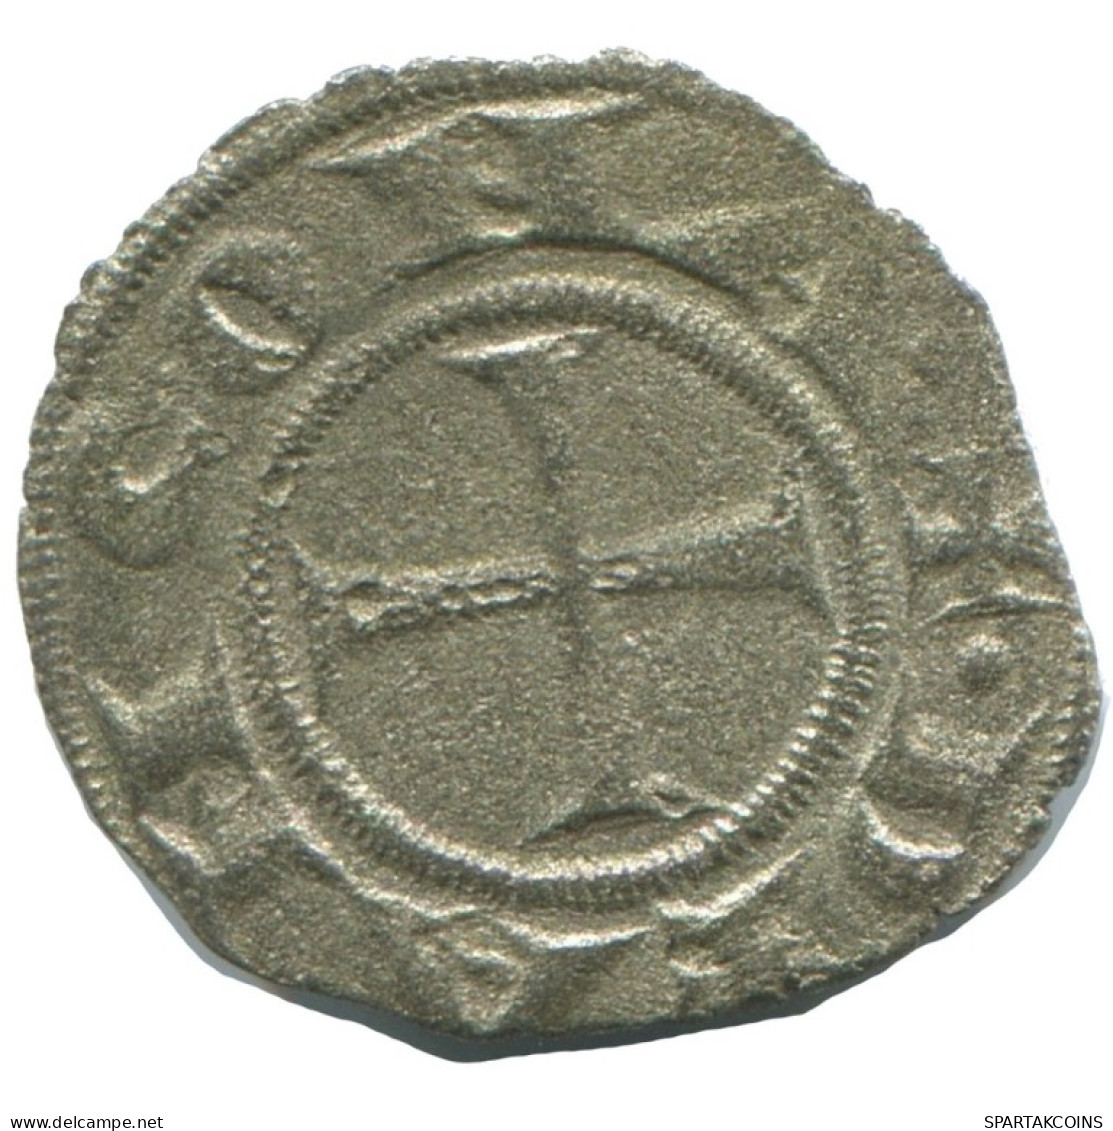 CRUSADER CROSS Authentic Original MEDIEVAL EUROPEAN Coin 0.6g/16mm #AC120.8.U.A - Andere - Europa